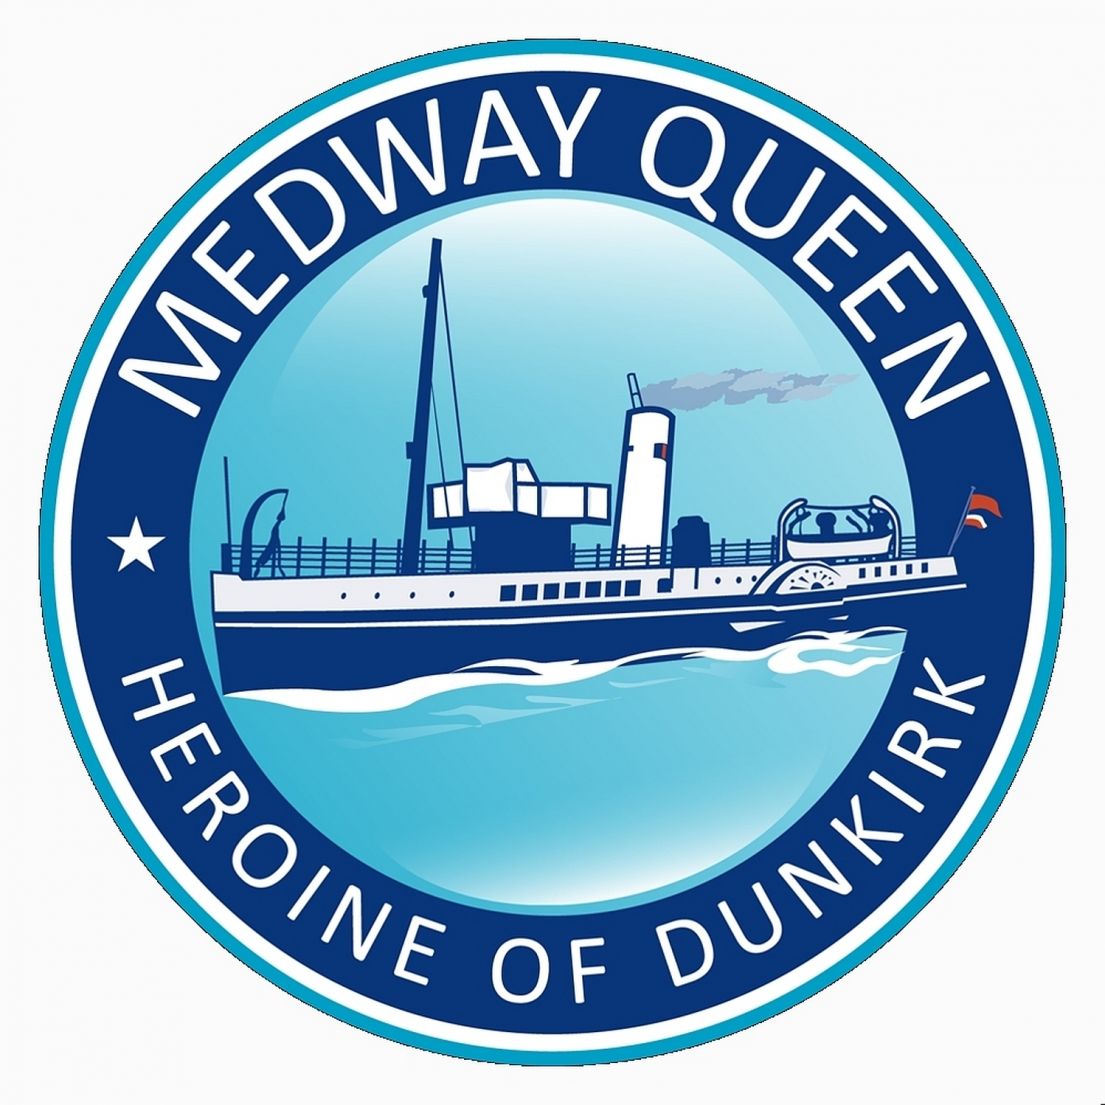 The Medway Queen Logo.